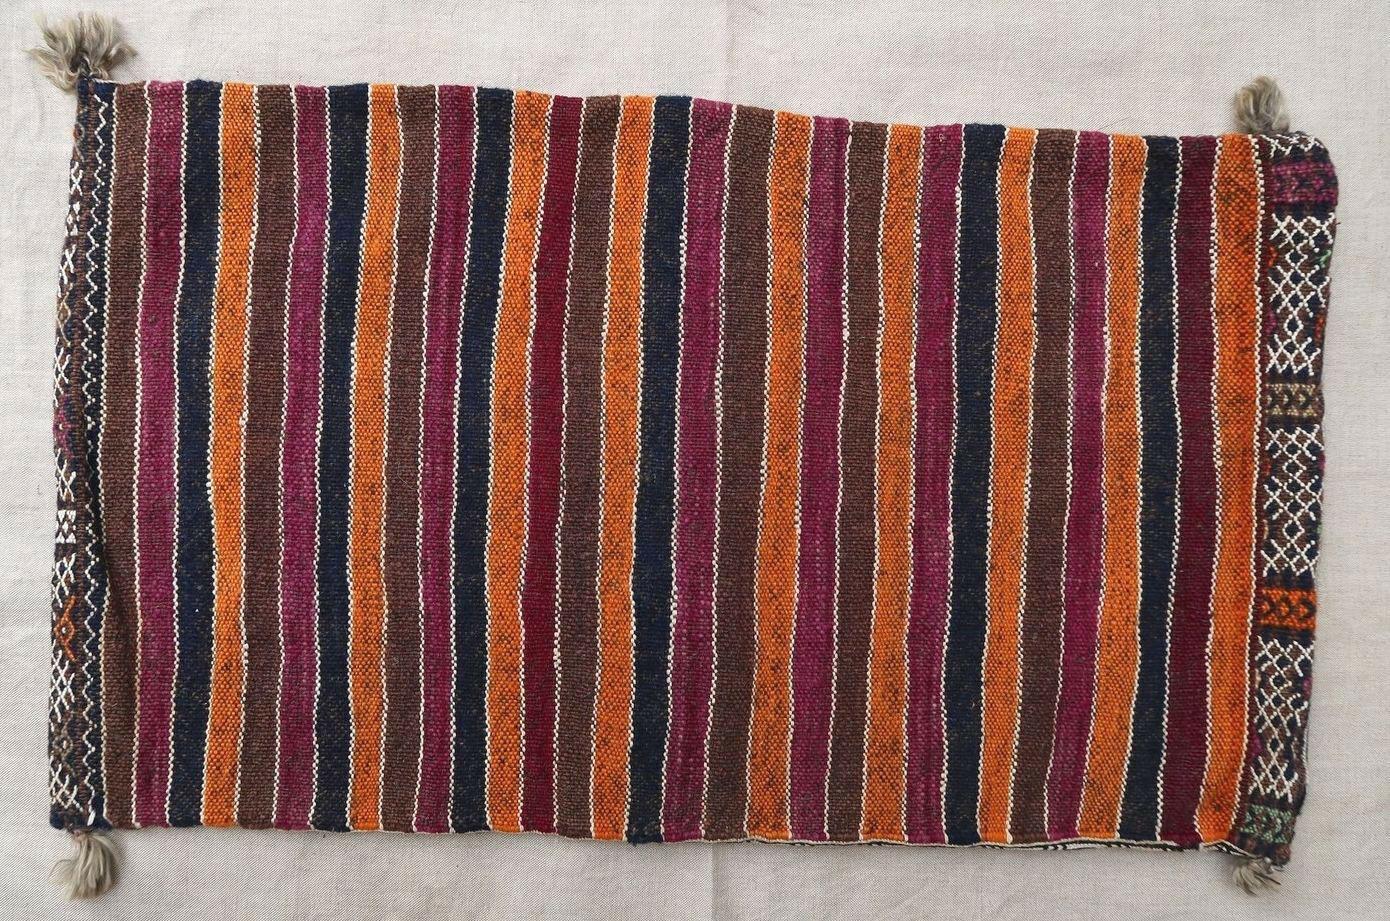 Handmade vintage Moroccan Berber cushion made out of vintage Kilim. The flat-weave is from the mid-20th century, it is in original good condition.

- Condition: Original good,

- circa 1950s,

- Size: 1.2' x 2.1' (37cm x 66cm),

- Material: